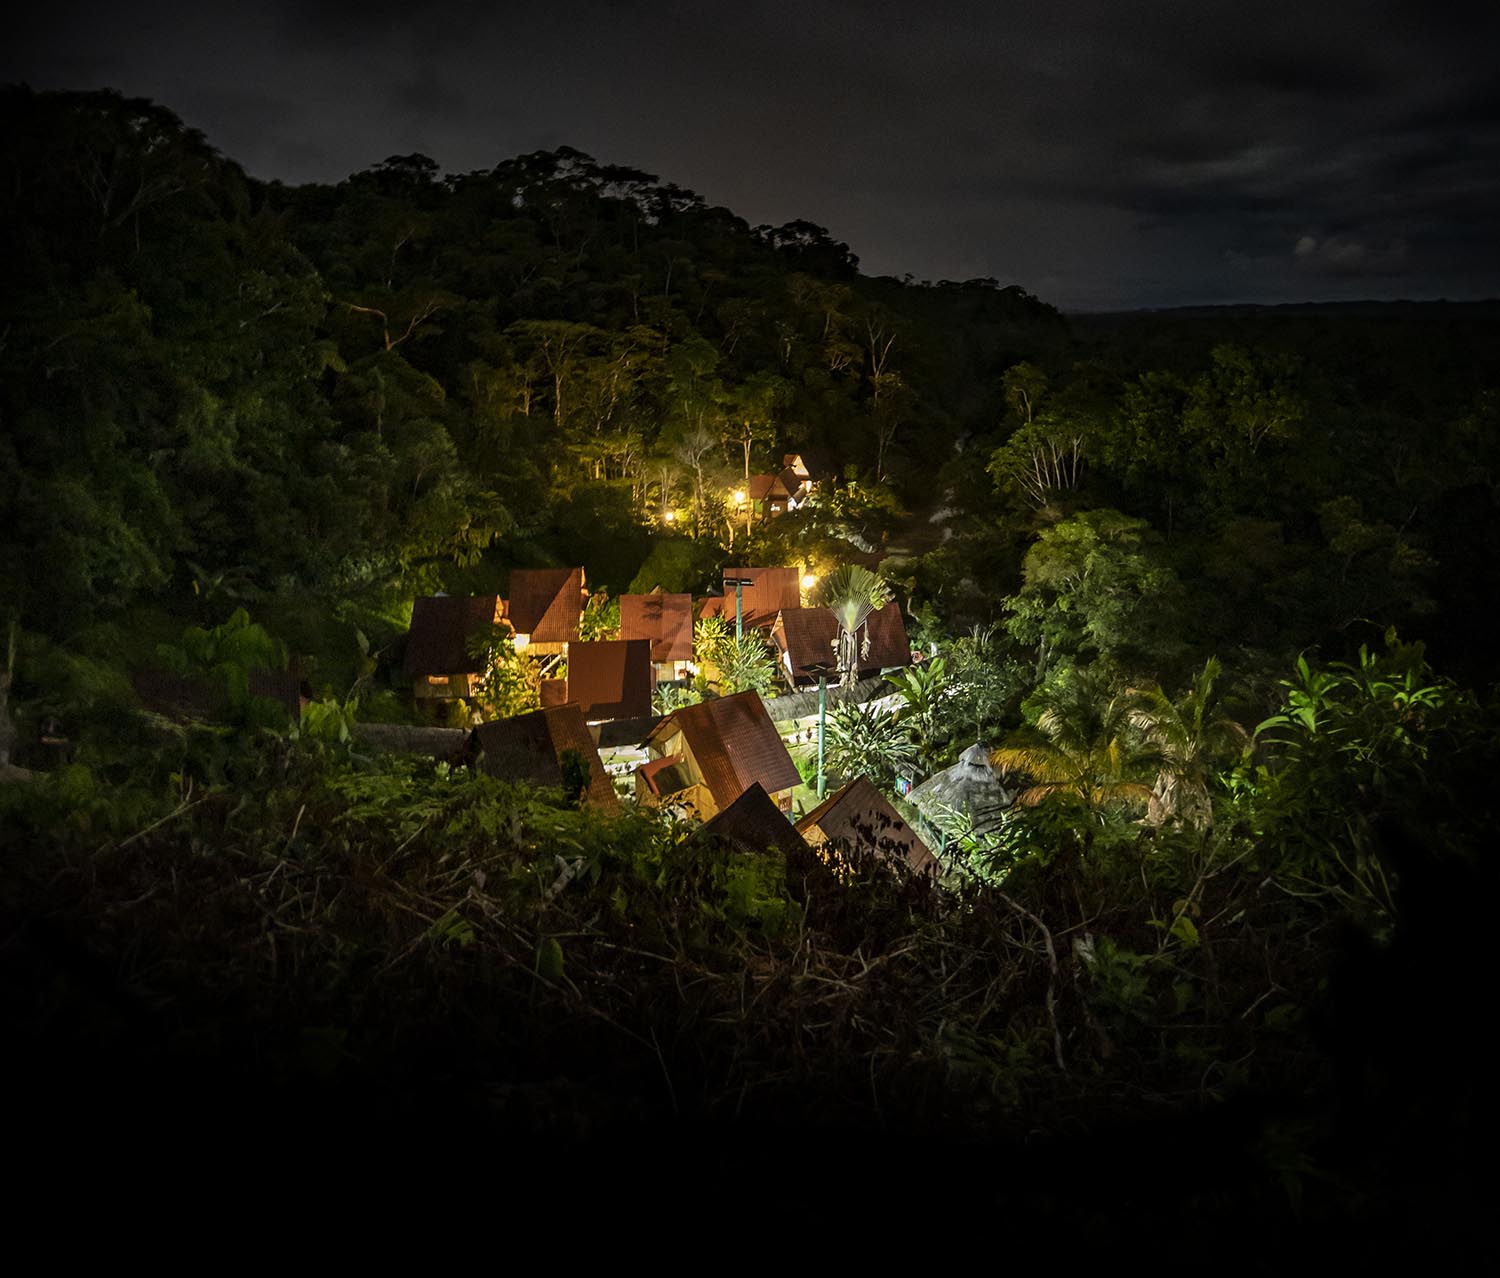 A collection of small buildings surrounded by thick jungle lit up at night